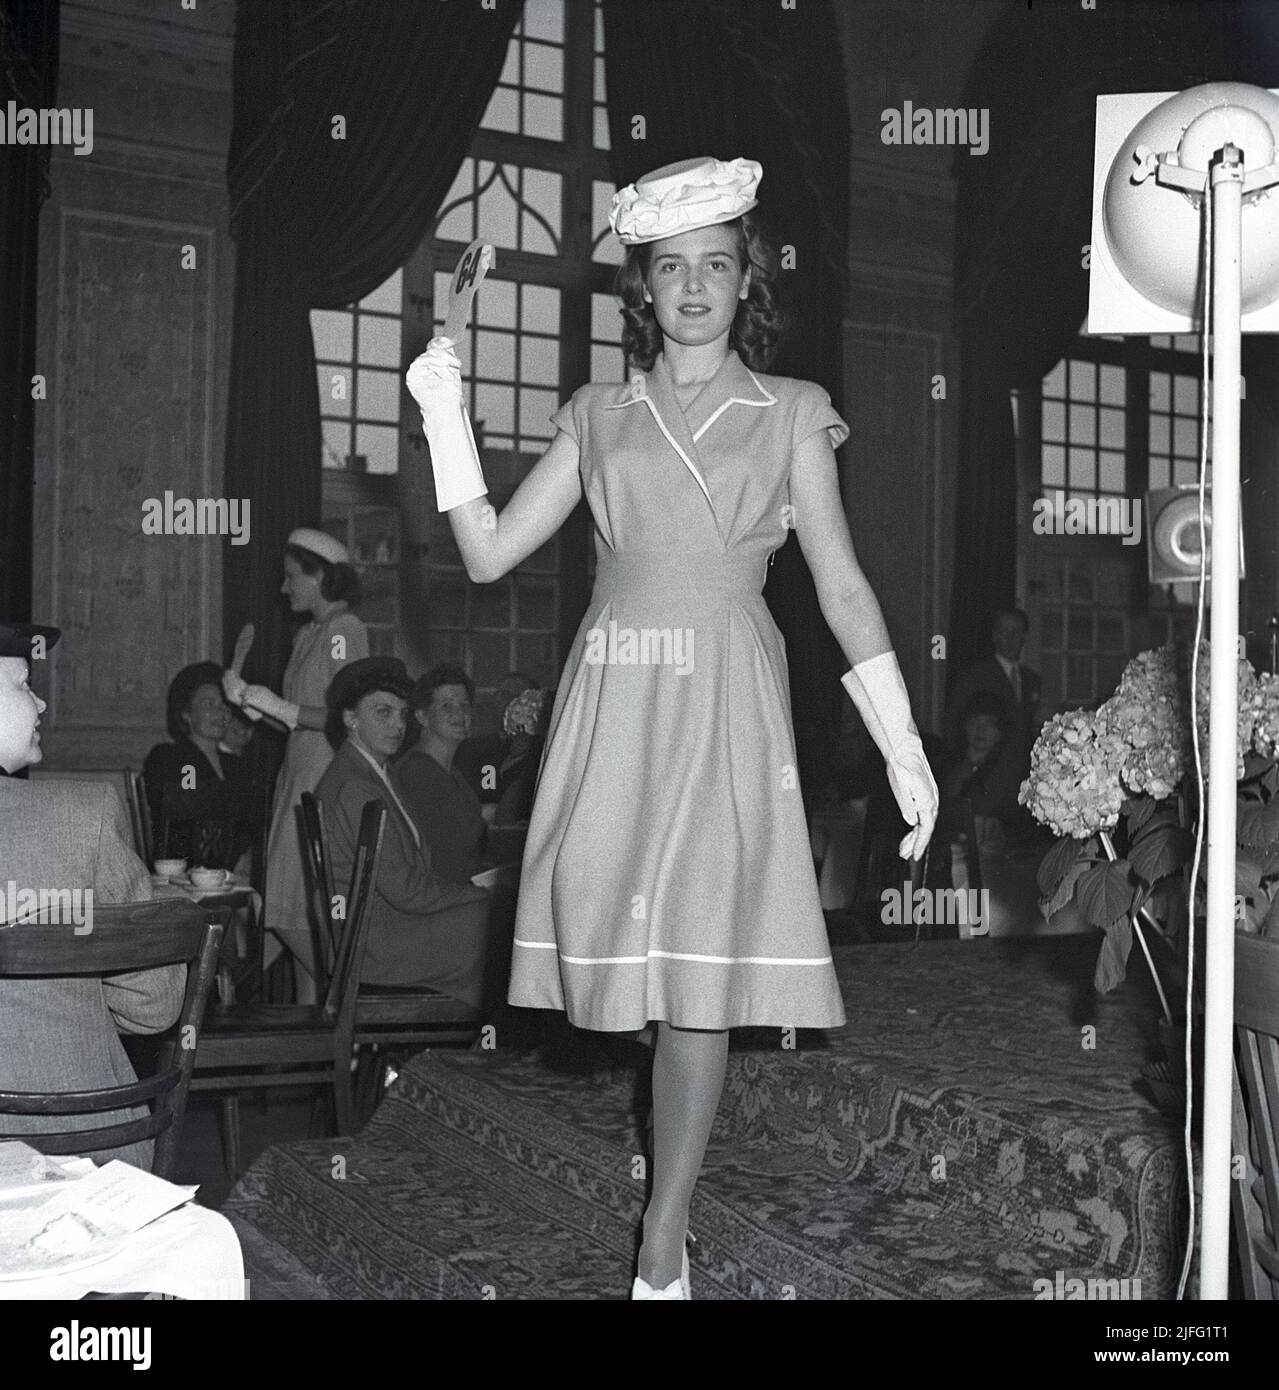 Women's fashion in the 1940s. A young woman in a 1946 outfit. A dress with the right length, matching hat and gloves. The fashion show of ladies fashion of this year goes on in front of people in an audience. Sweden 1946  Kristoffersson T148-5 Stock Photo